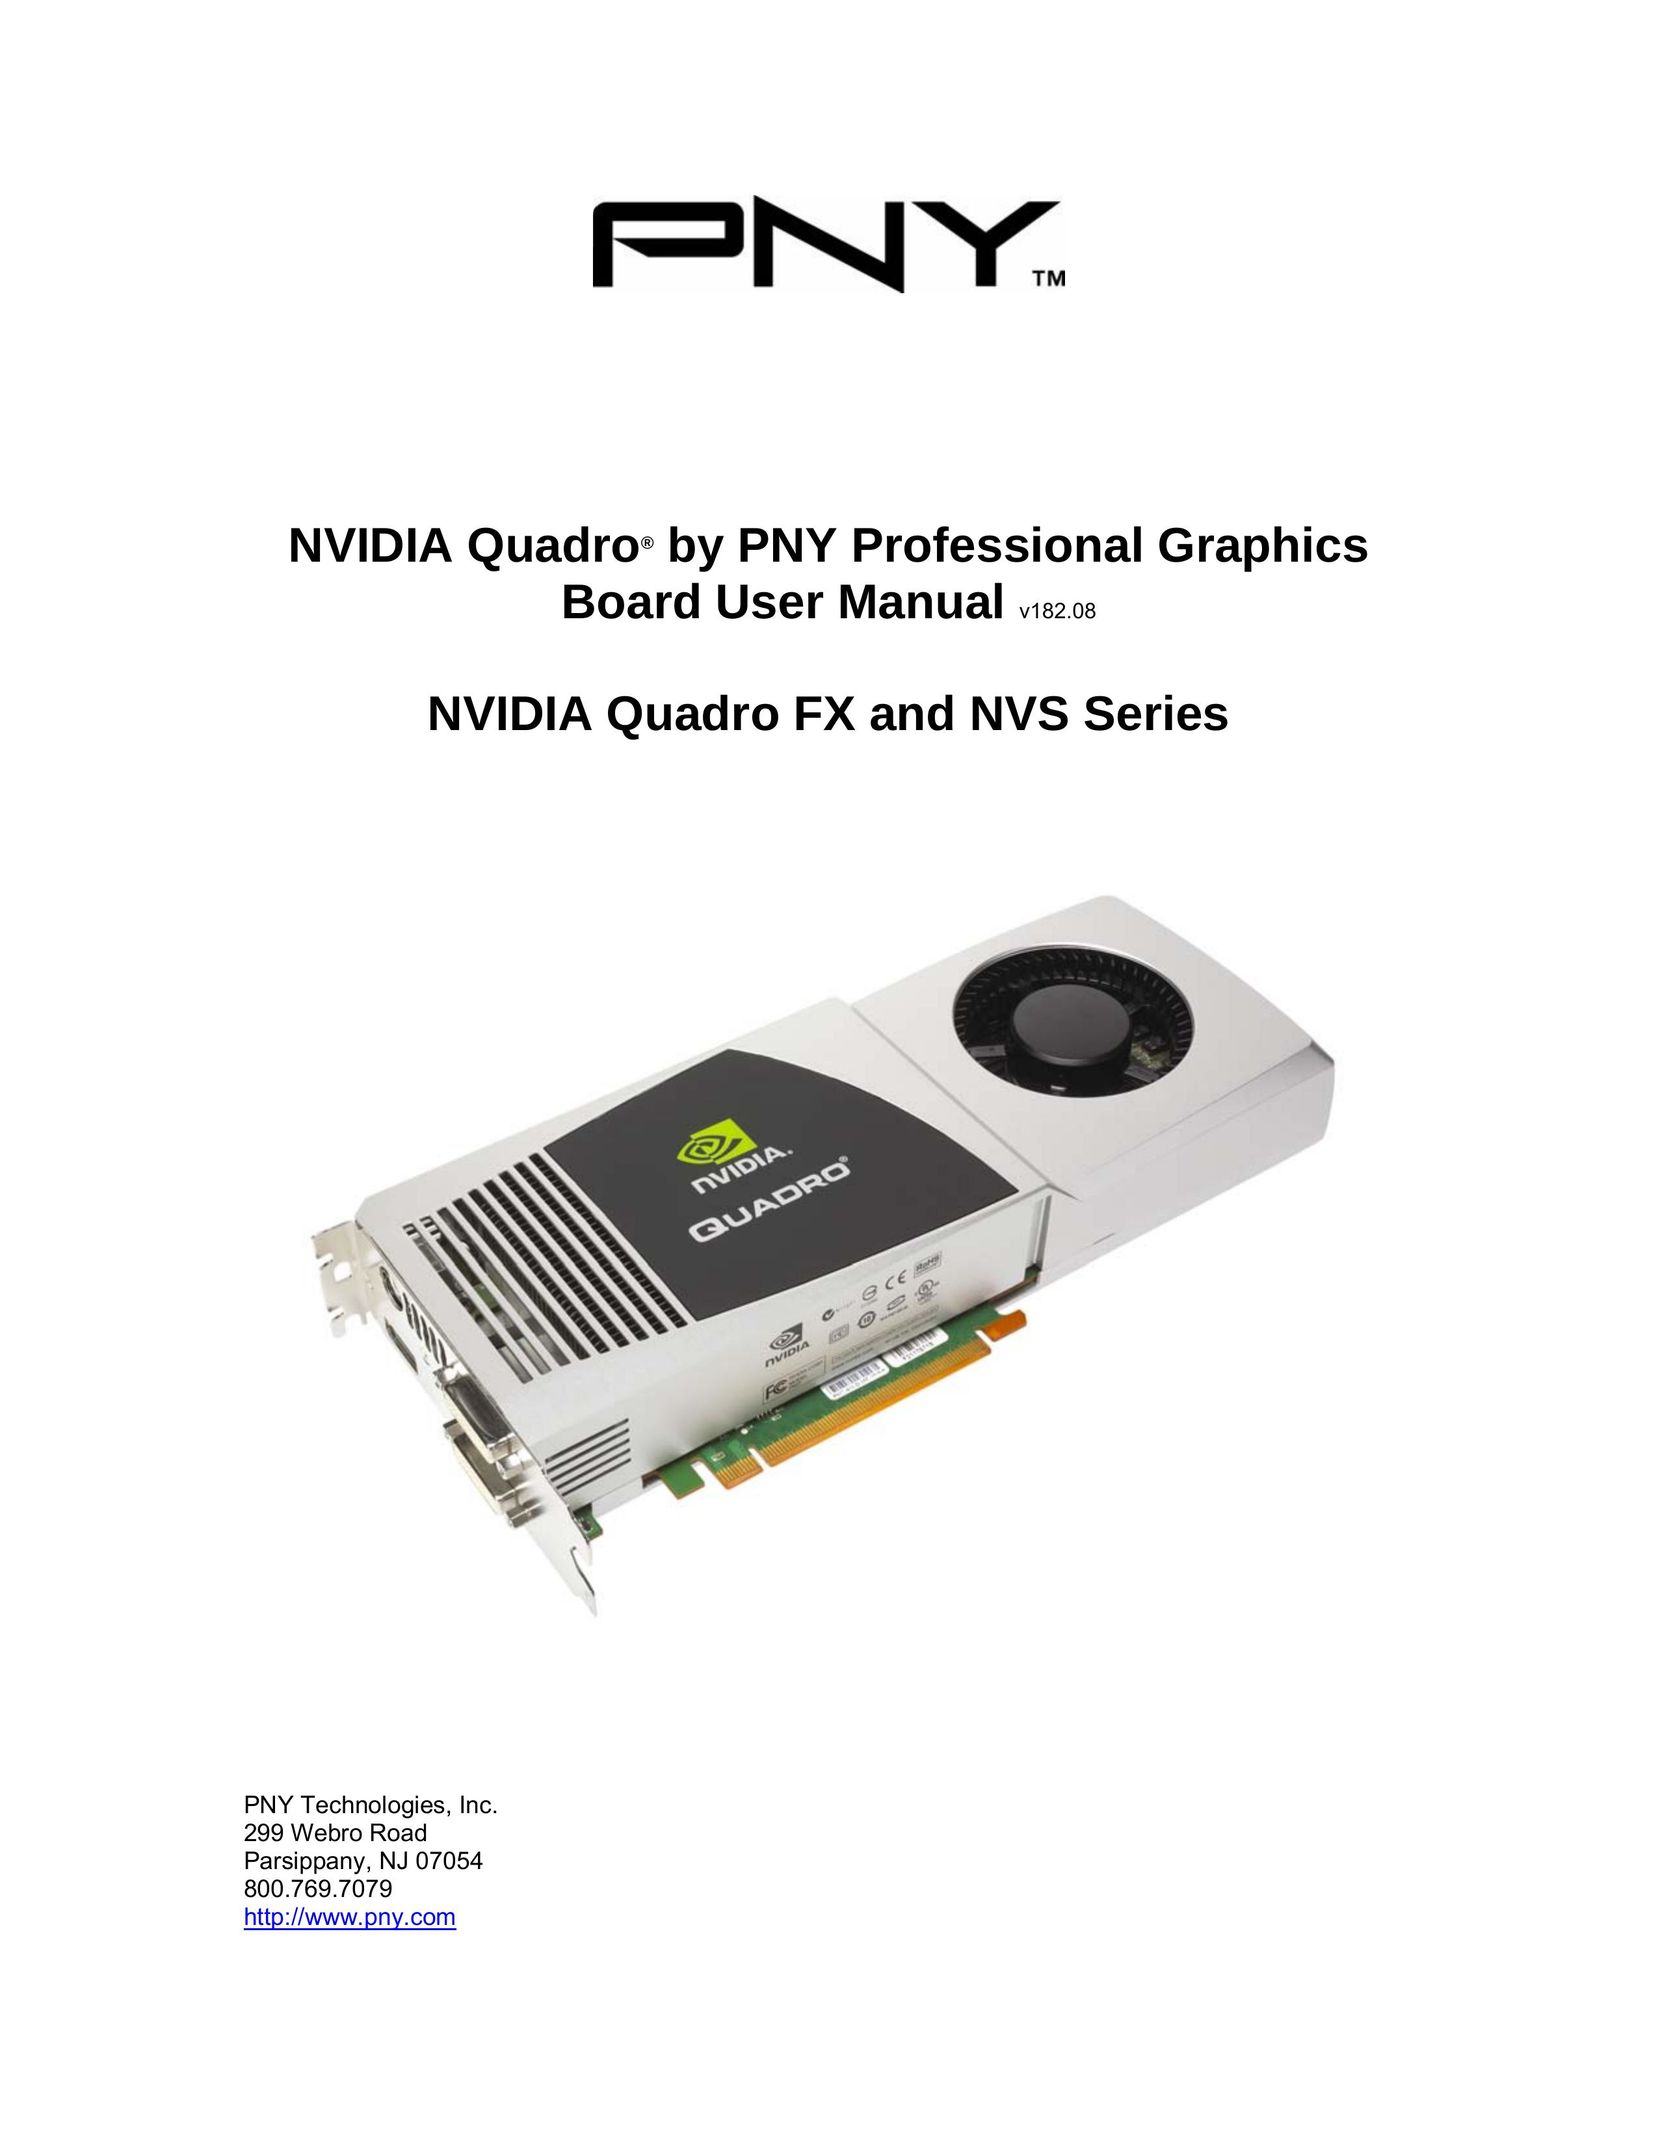 PNY FX 4600G Computer Hardware User Manual